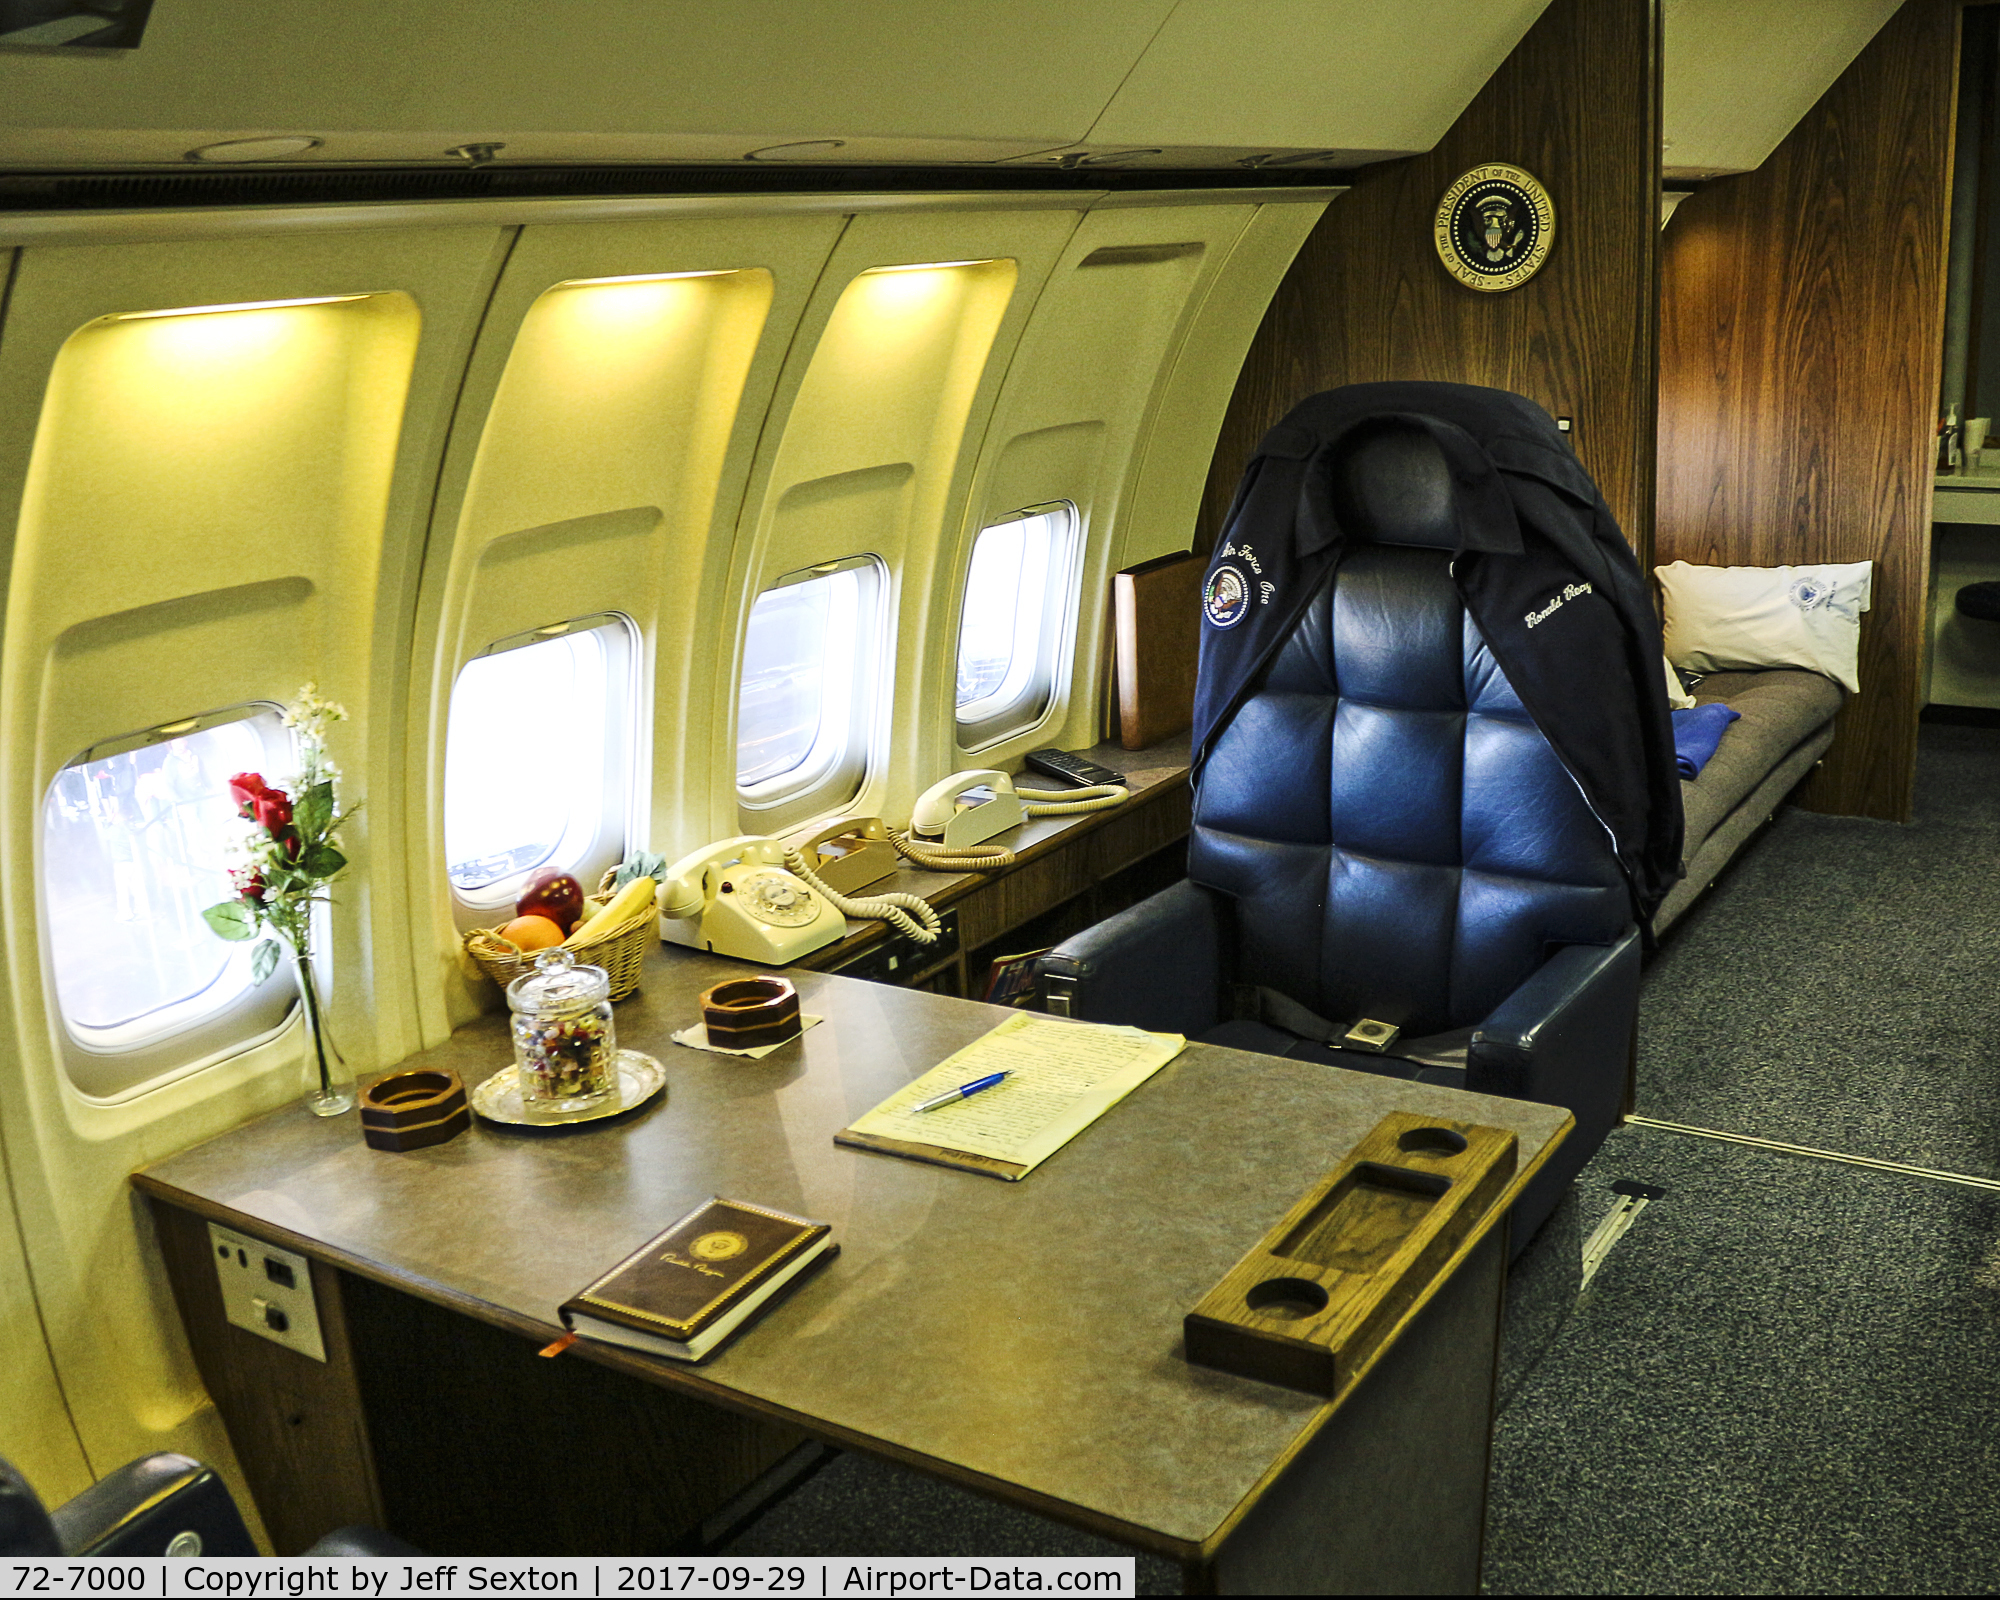 72-7000, 1972 Boeing VC-137C C/N 20630, President Ronald Reagan's office on Air Force One